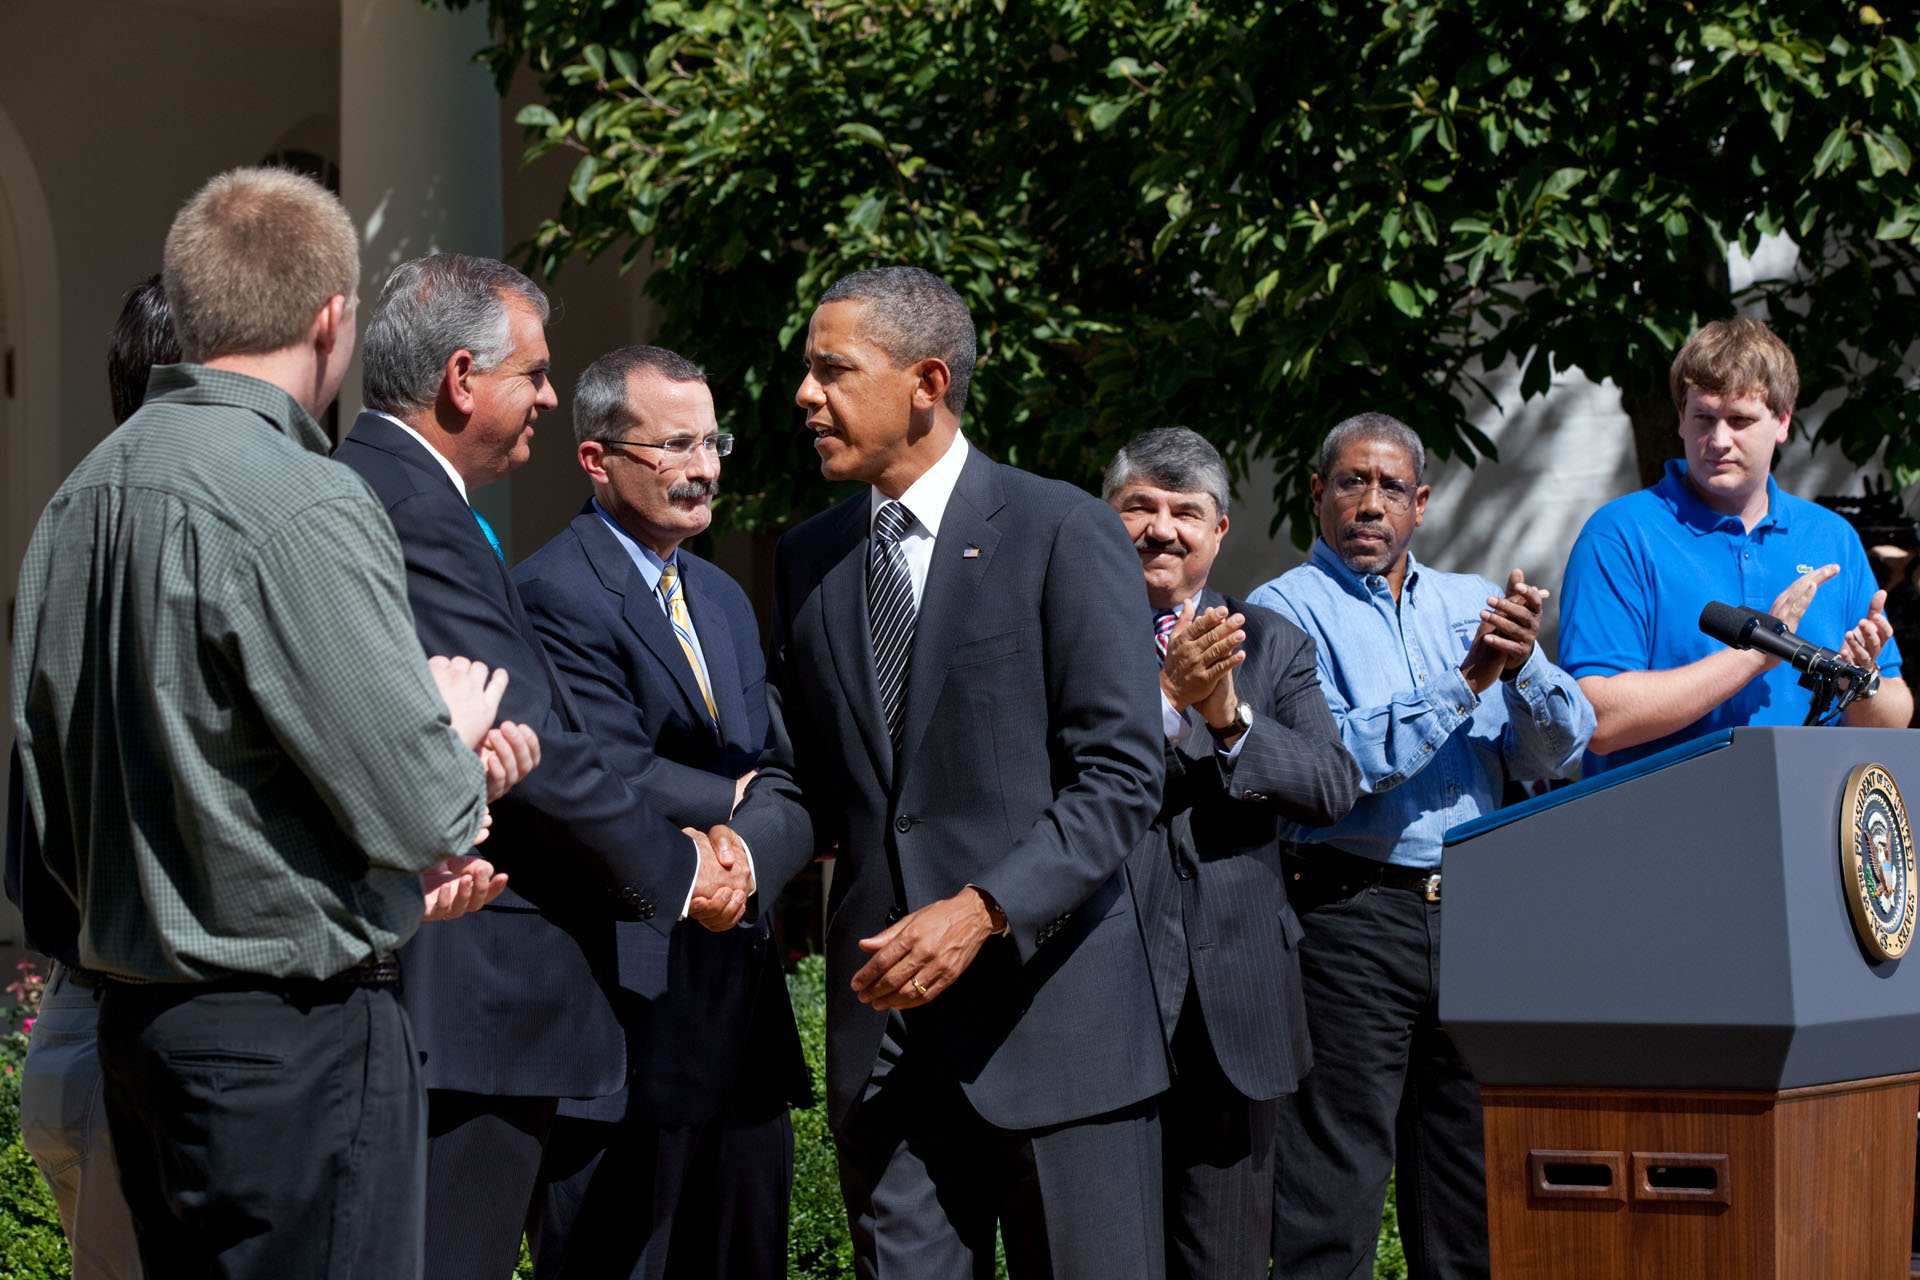 President Obama shakes hands with Transportation Secretary Ray LaHood after a statement on the Surface Transportation Bill